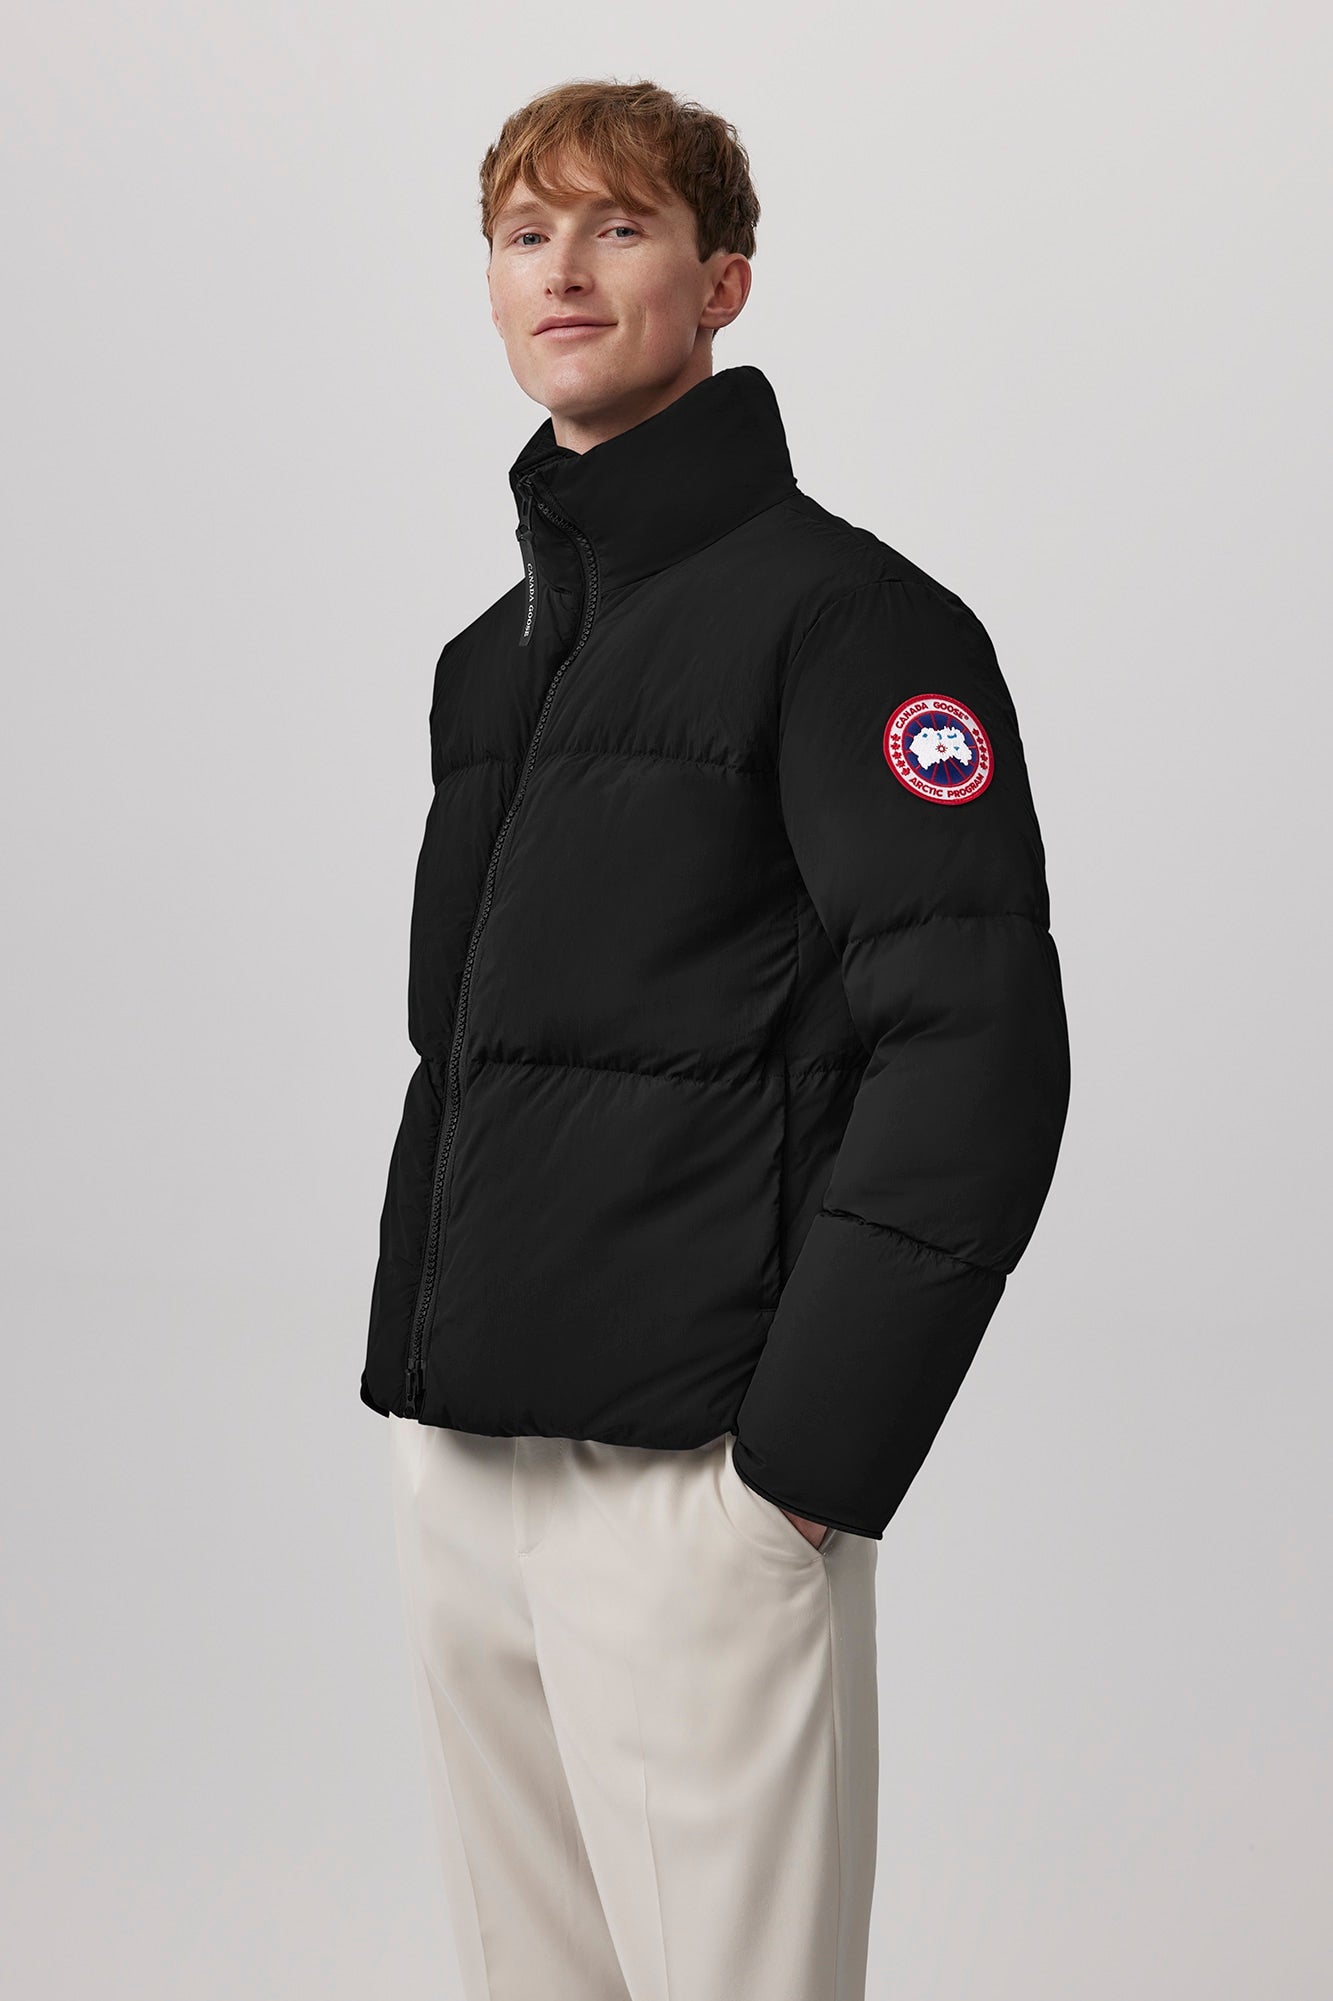 Shop Authentic Canada Goose Jackets, Parkas and more at Freeds